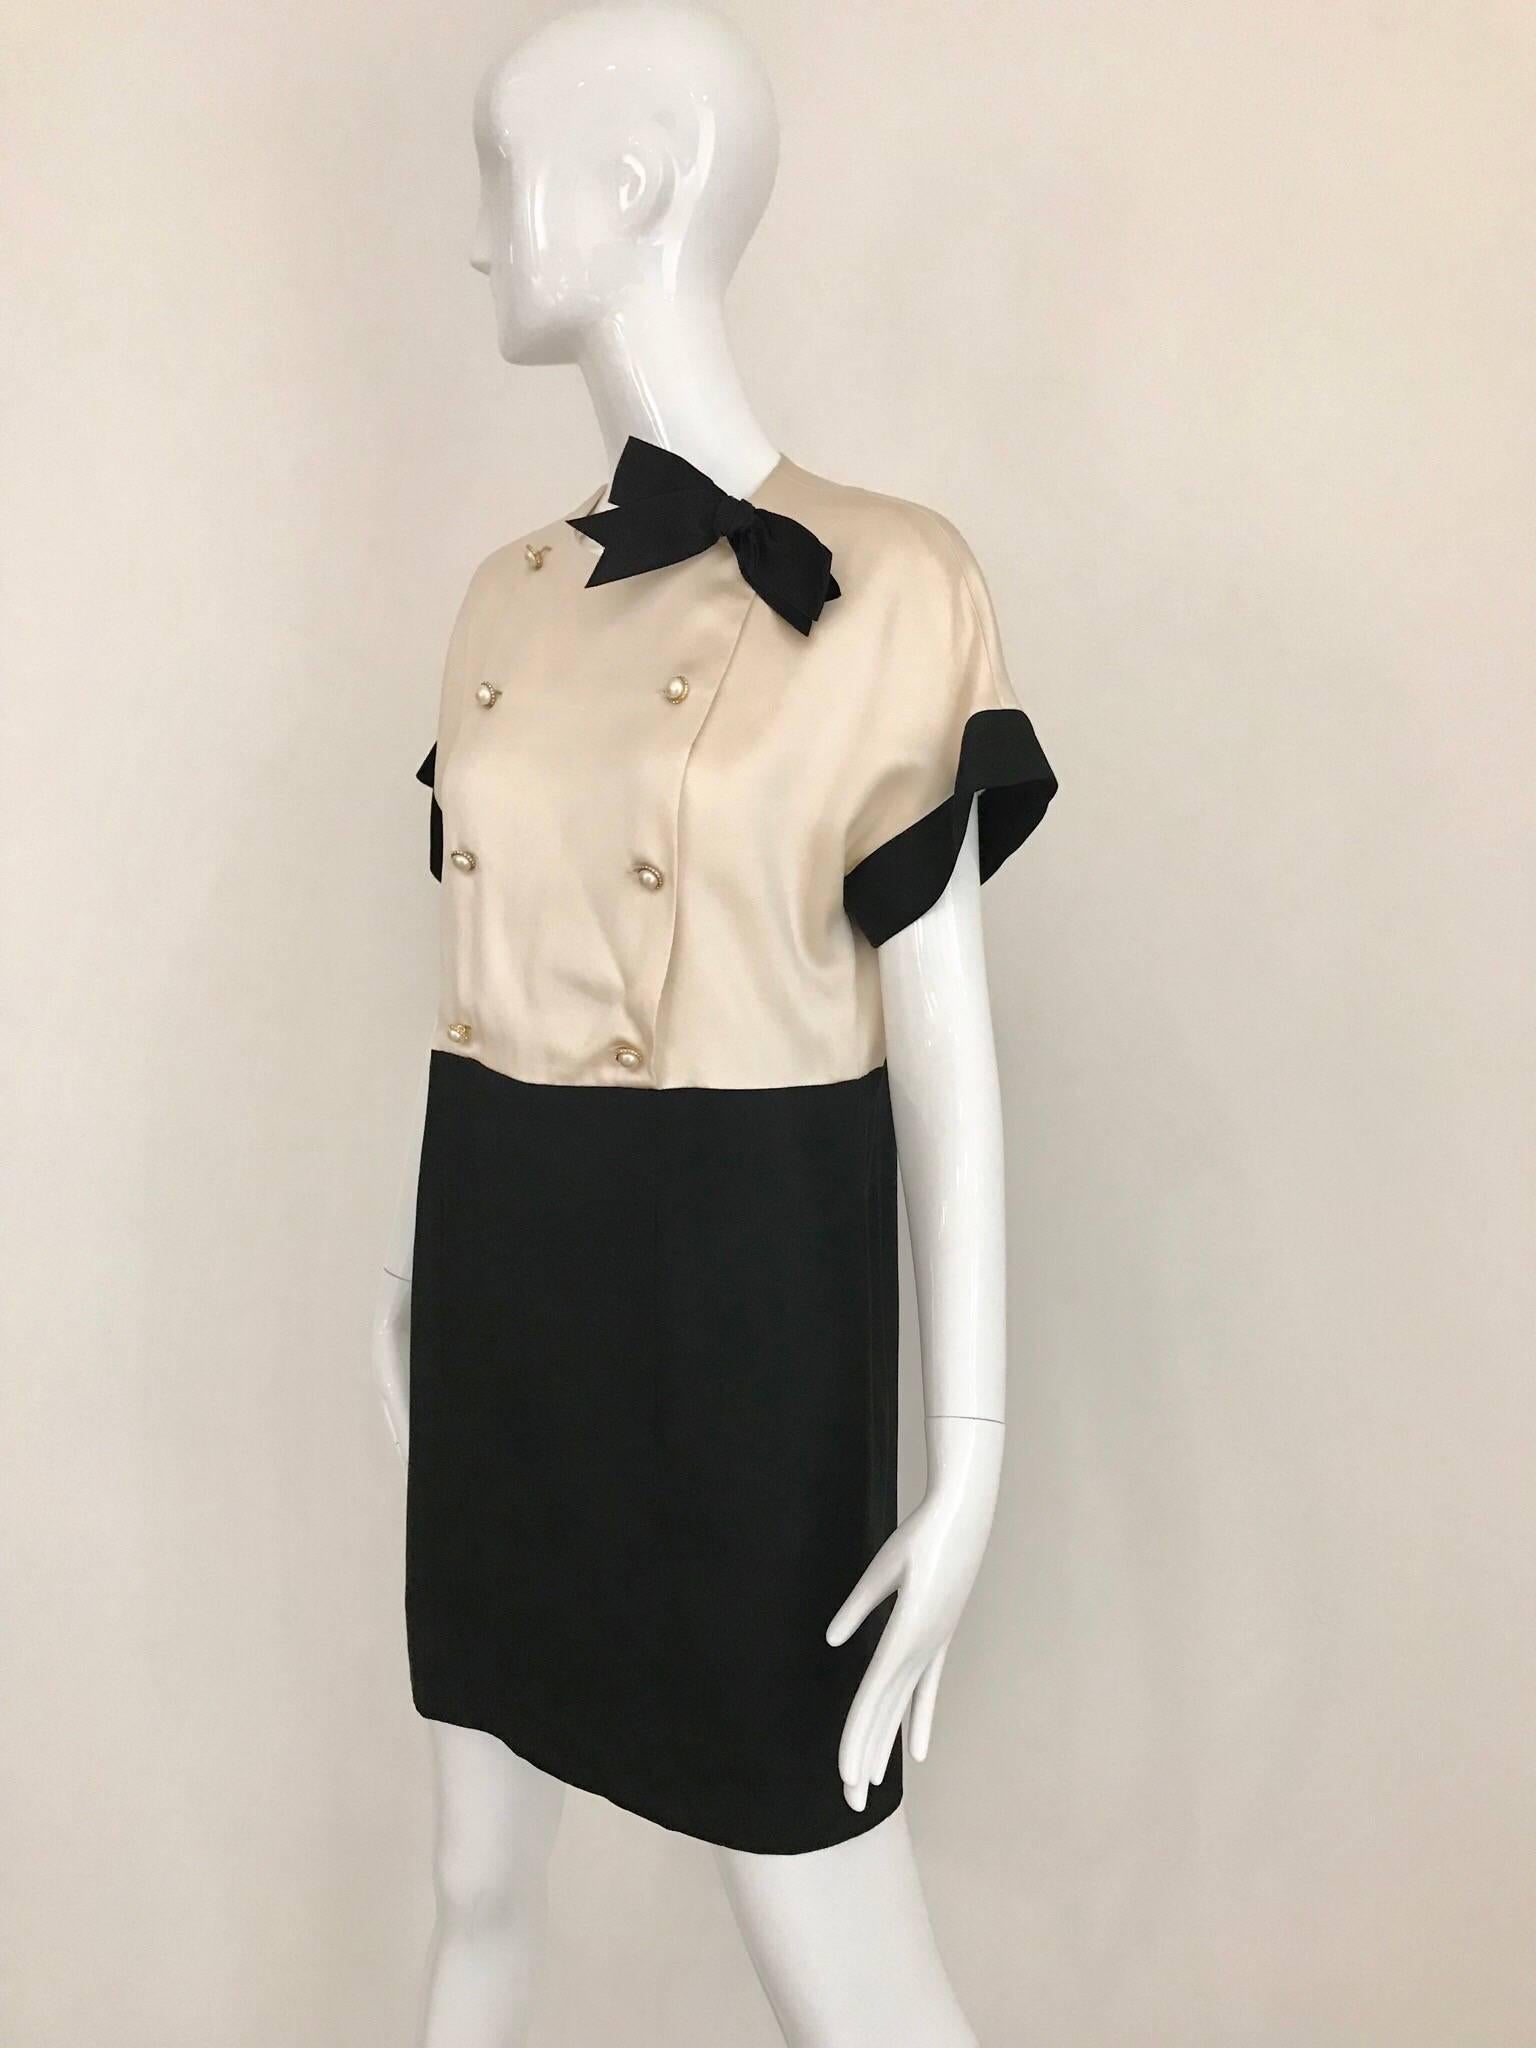 1980s Classic CHANEL Creme and Black silk charmeuse cocktail dress. Dress has gold pearl buttons and black satin bow.  Size: Small - Medium. 2/4/6
Bust: 39 